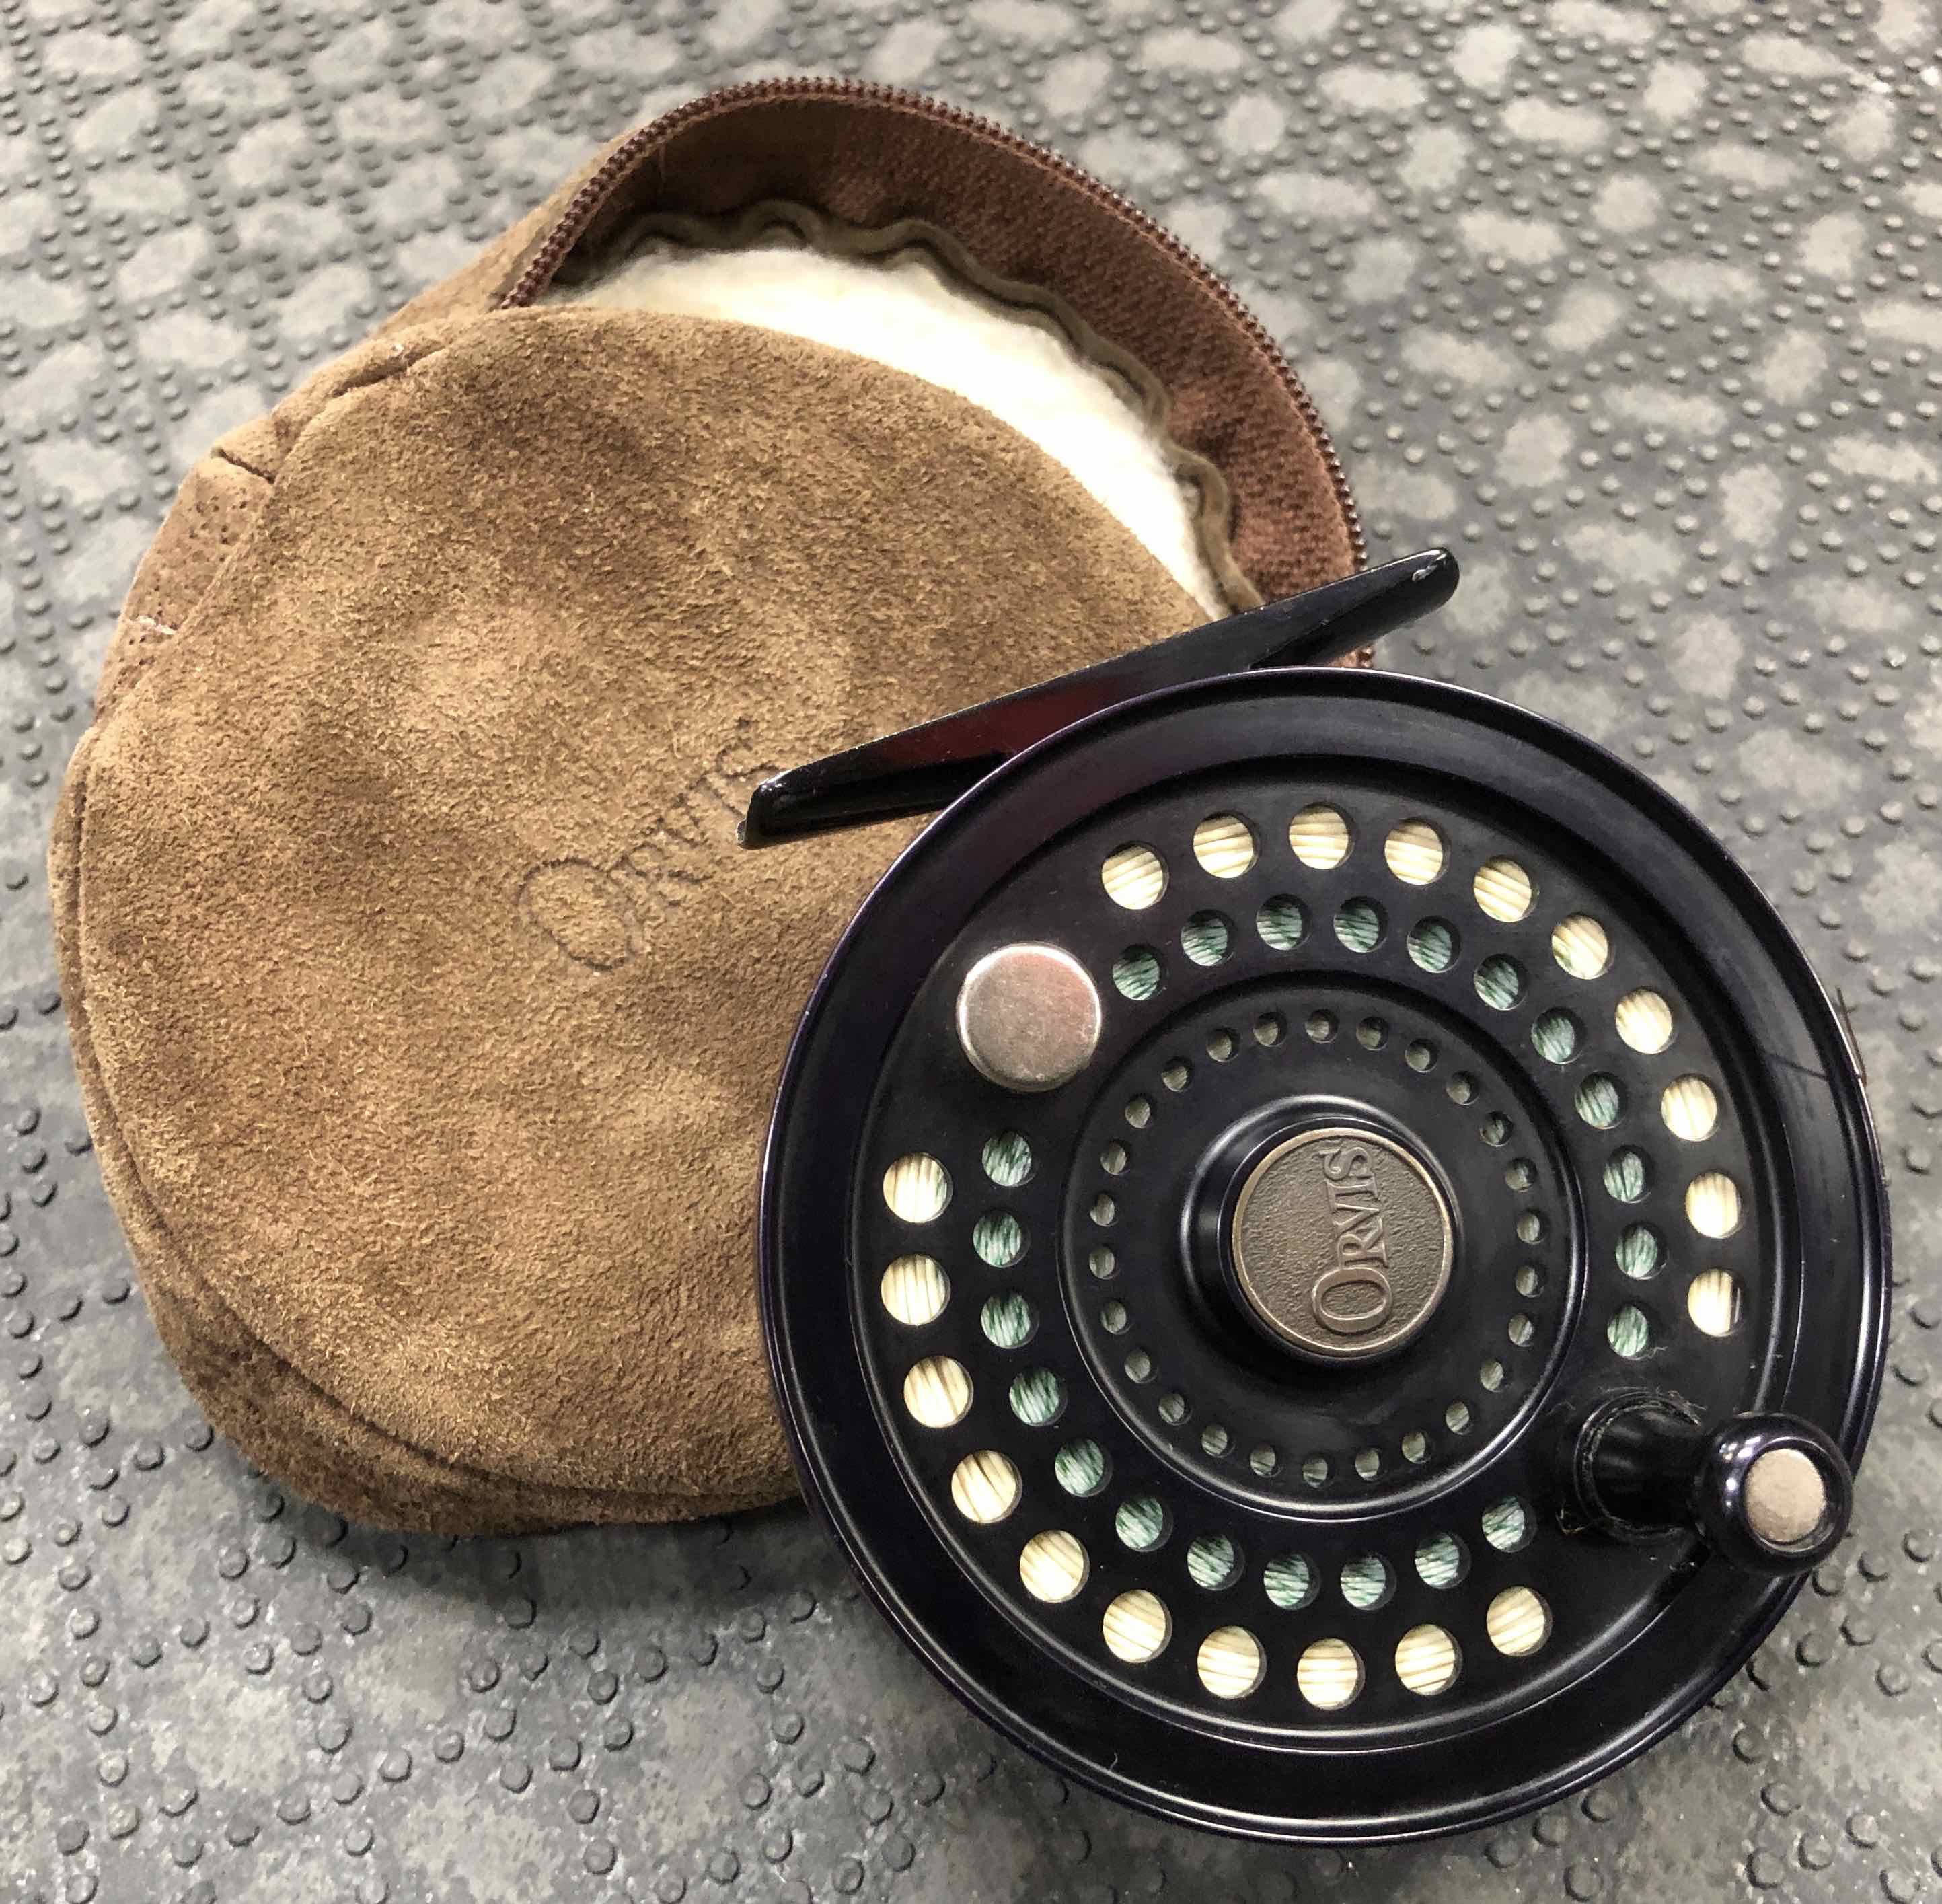 Orvis Presentation Fly Reel - EXR III - Made in Argentina - C/W A RIO Sinking Fly Line - GREAT SHAPE - $150